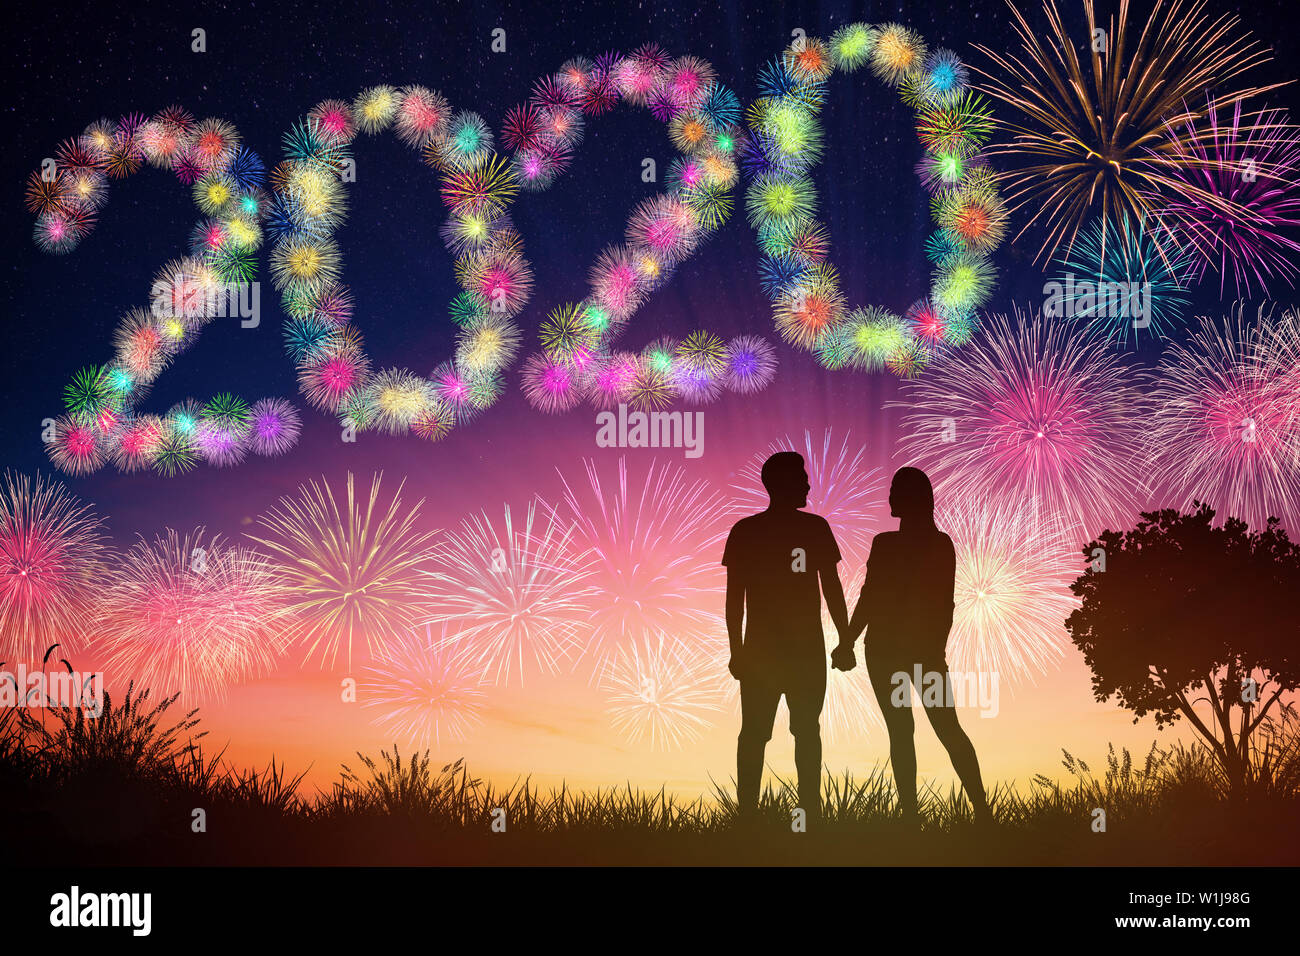 happy new year 2020 concepts. young couple watching fireworks on ...